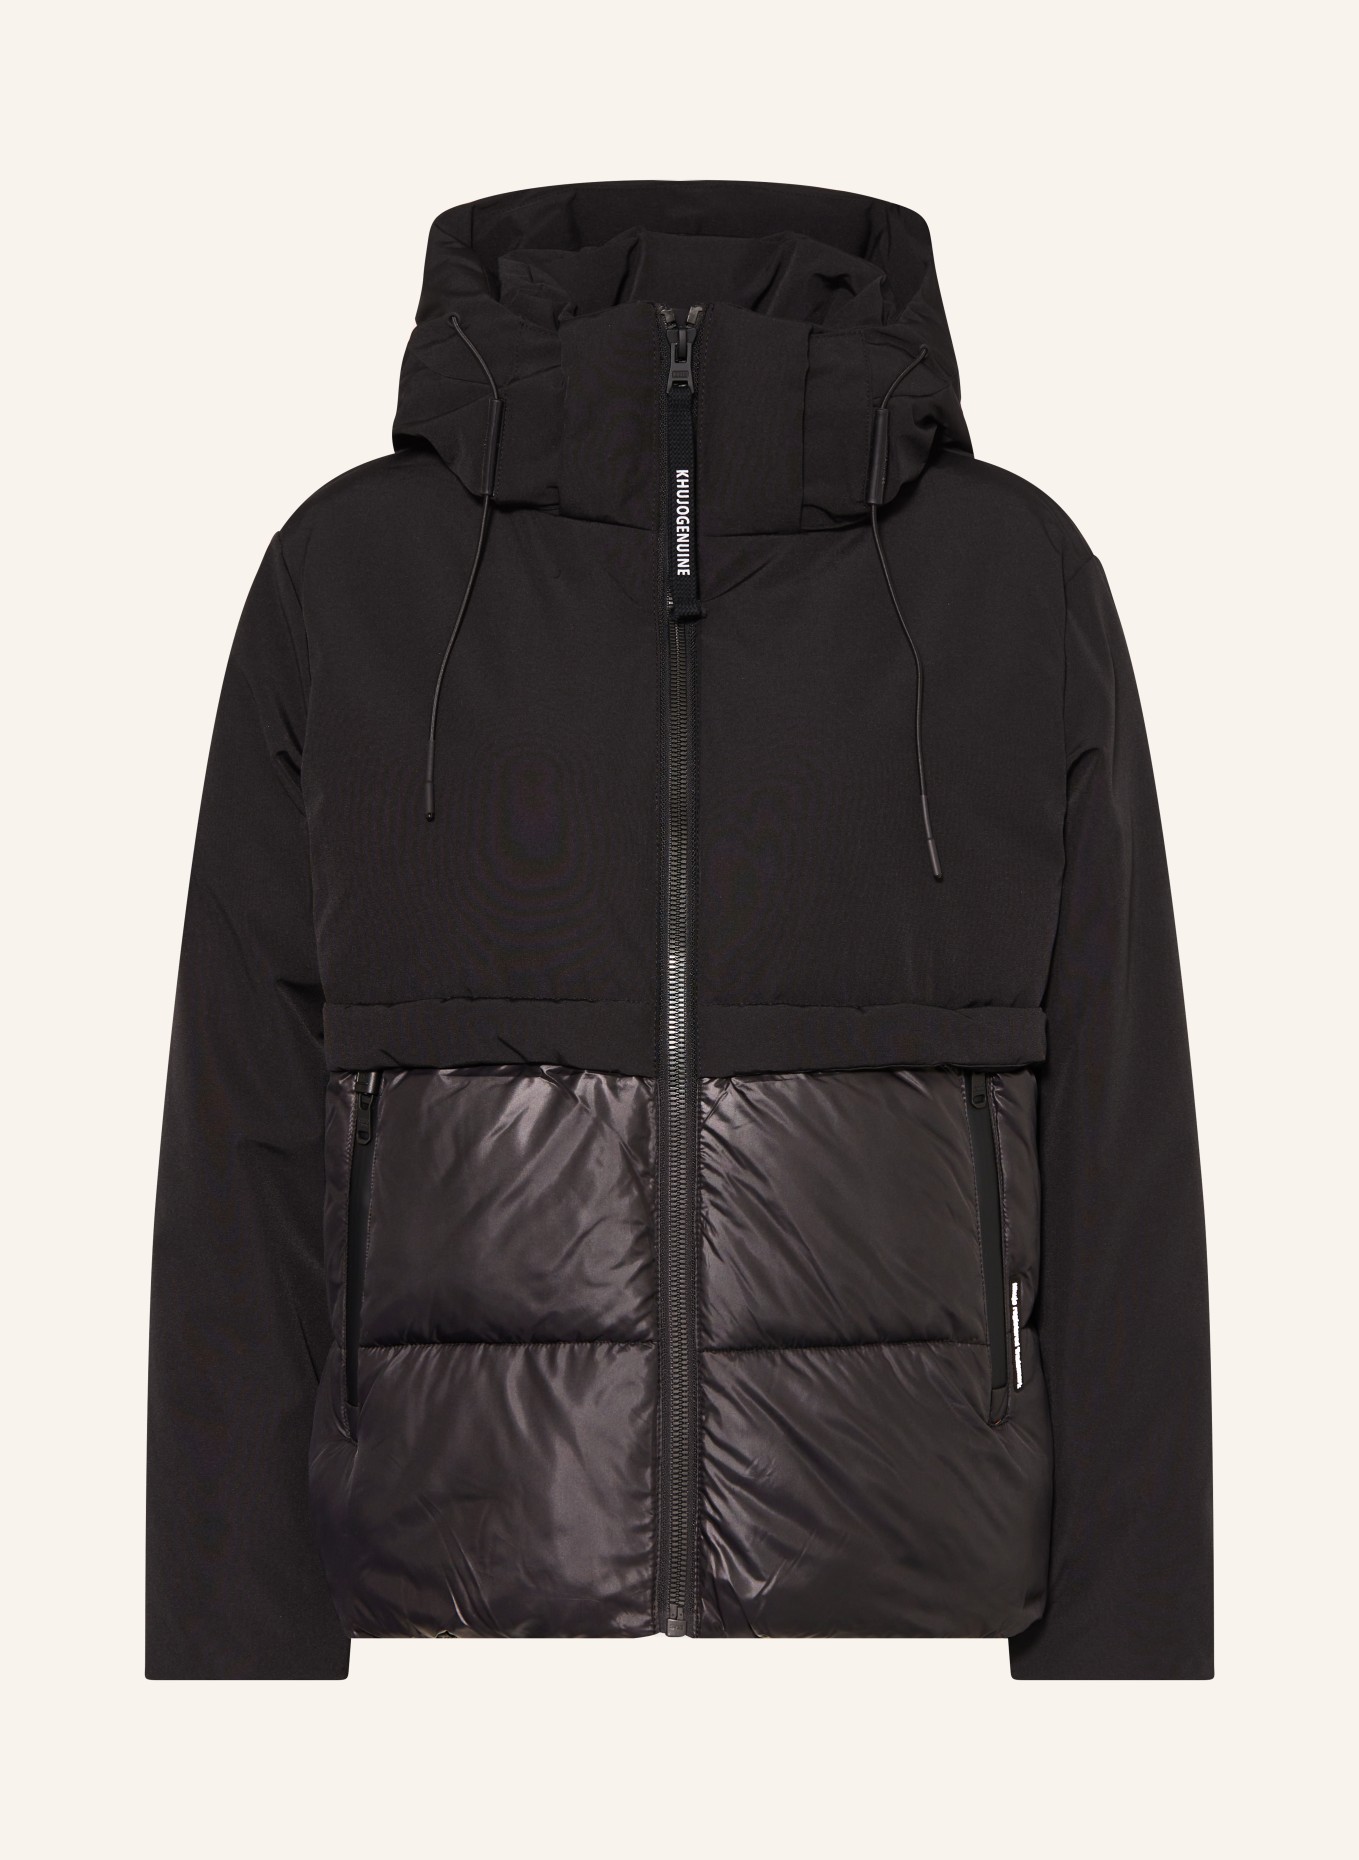 WAYRA in materials jacket khujo black Quilted mixed in